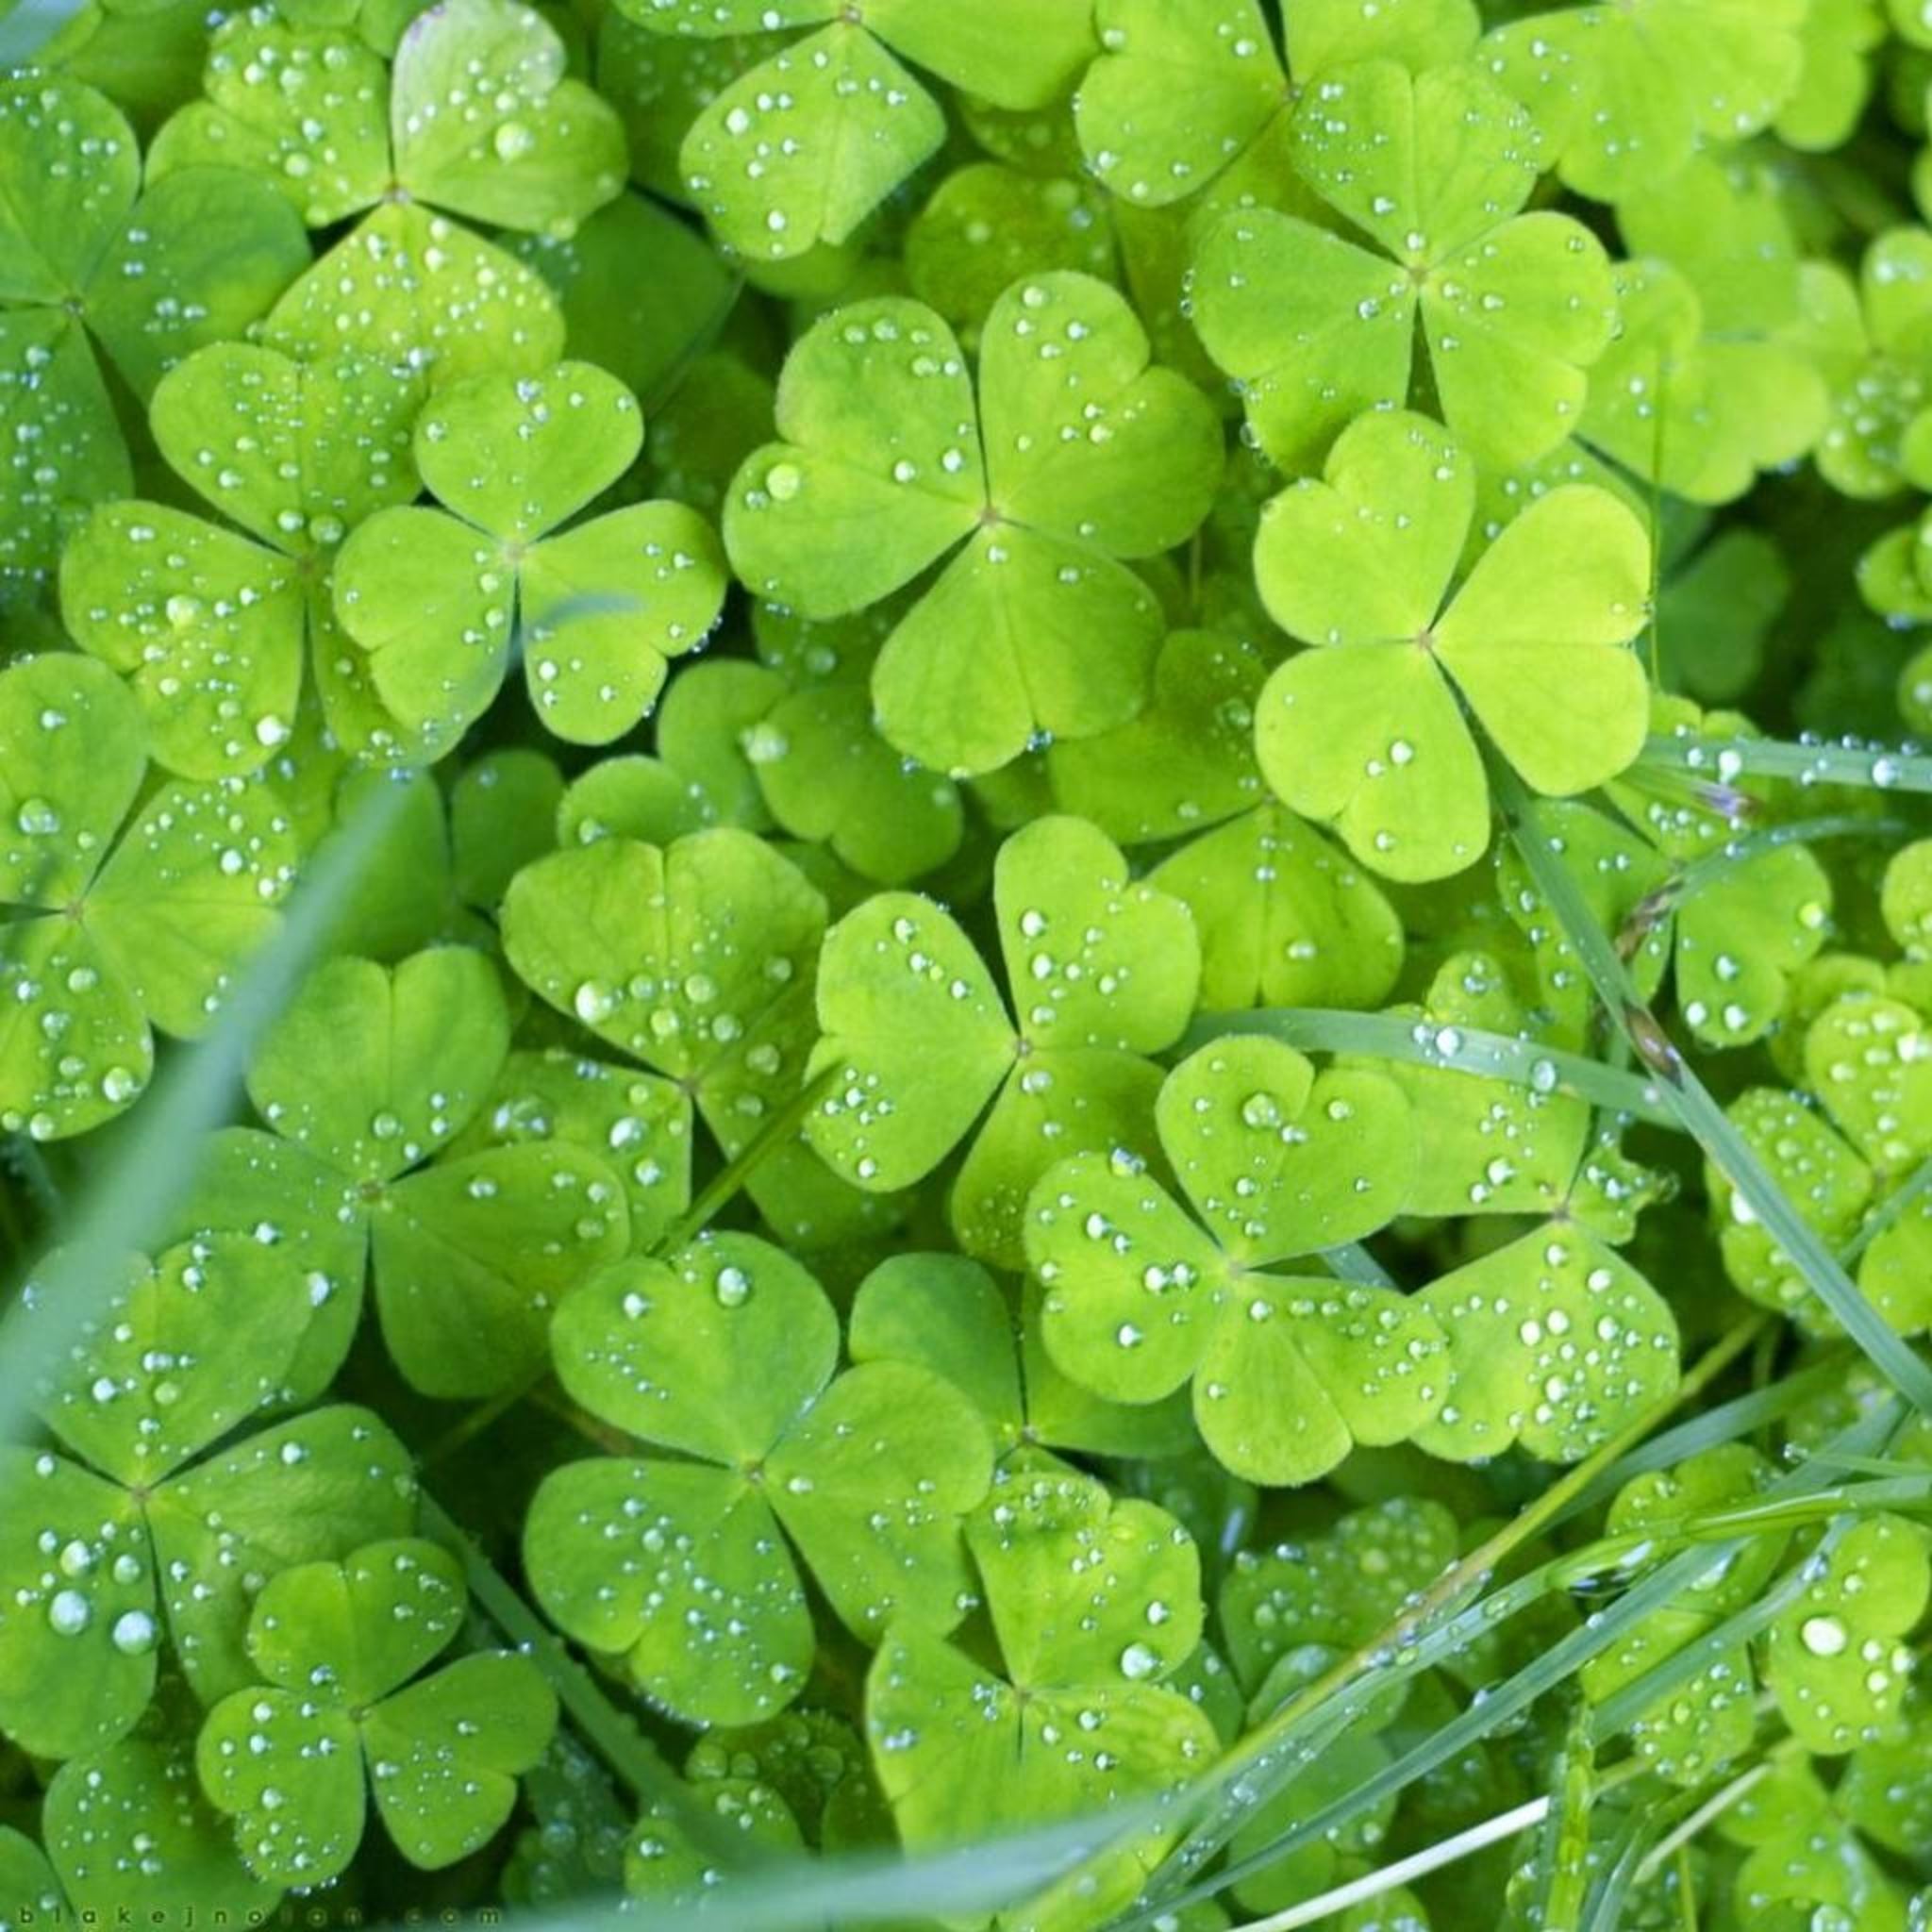 Pure Green Clover Land iPad Air Wallpaper Free Download